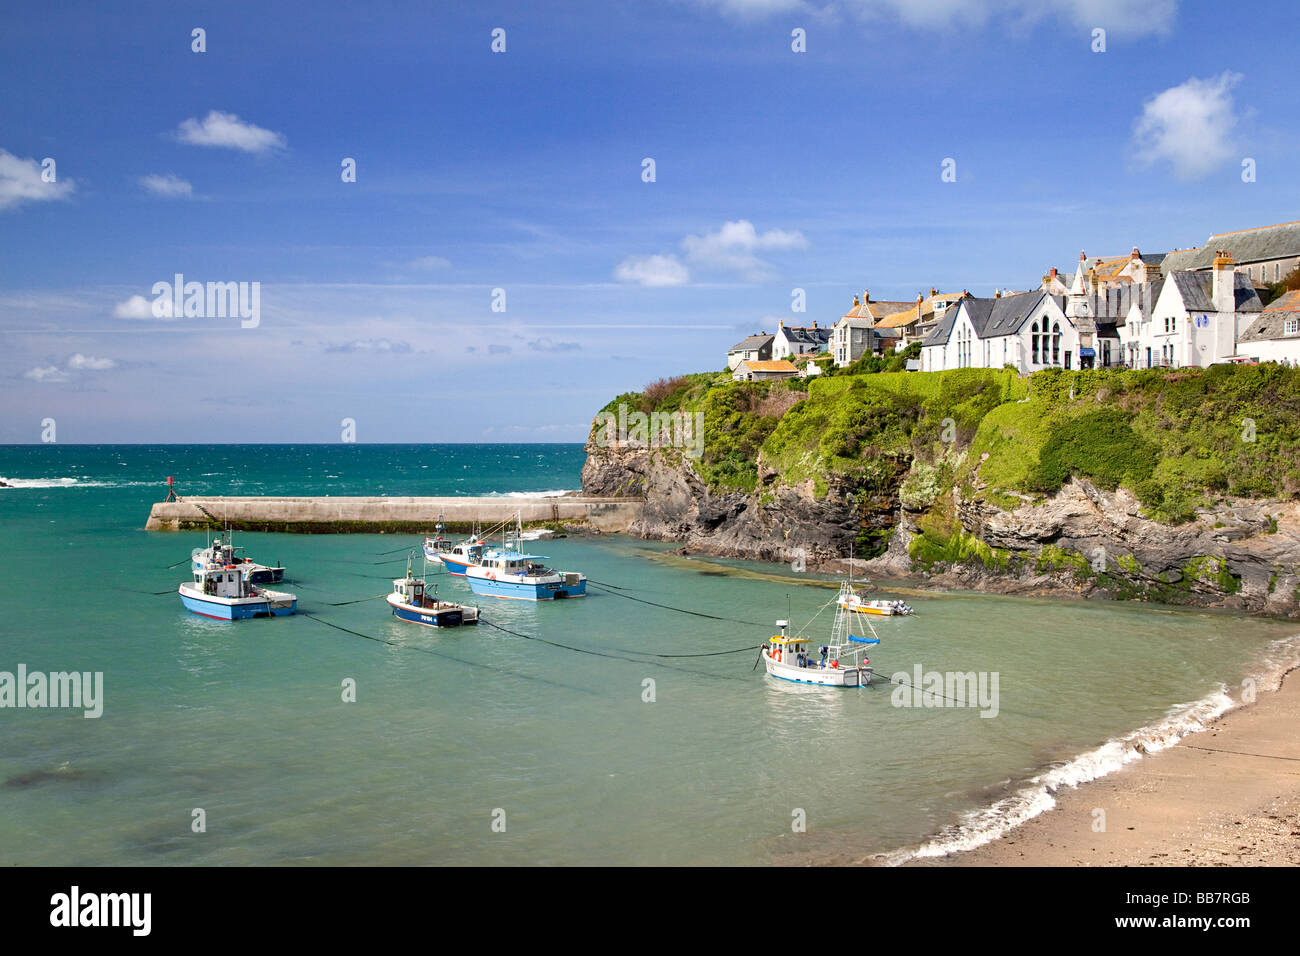 Port Isaac is one of Cornwall's most popular holiday destinations, England, UK. Stock Photo